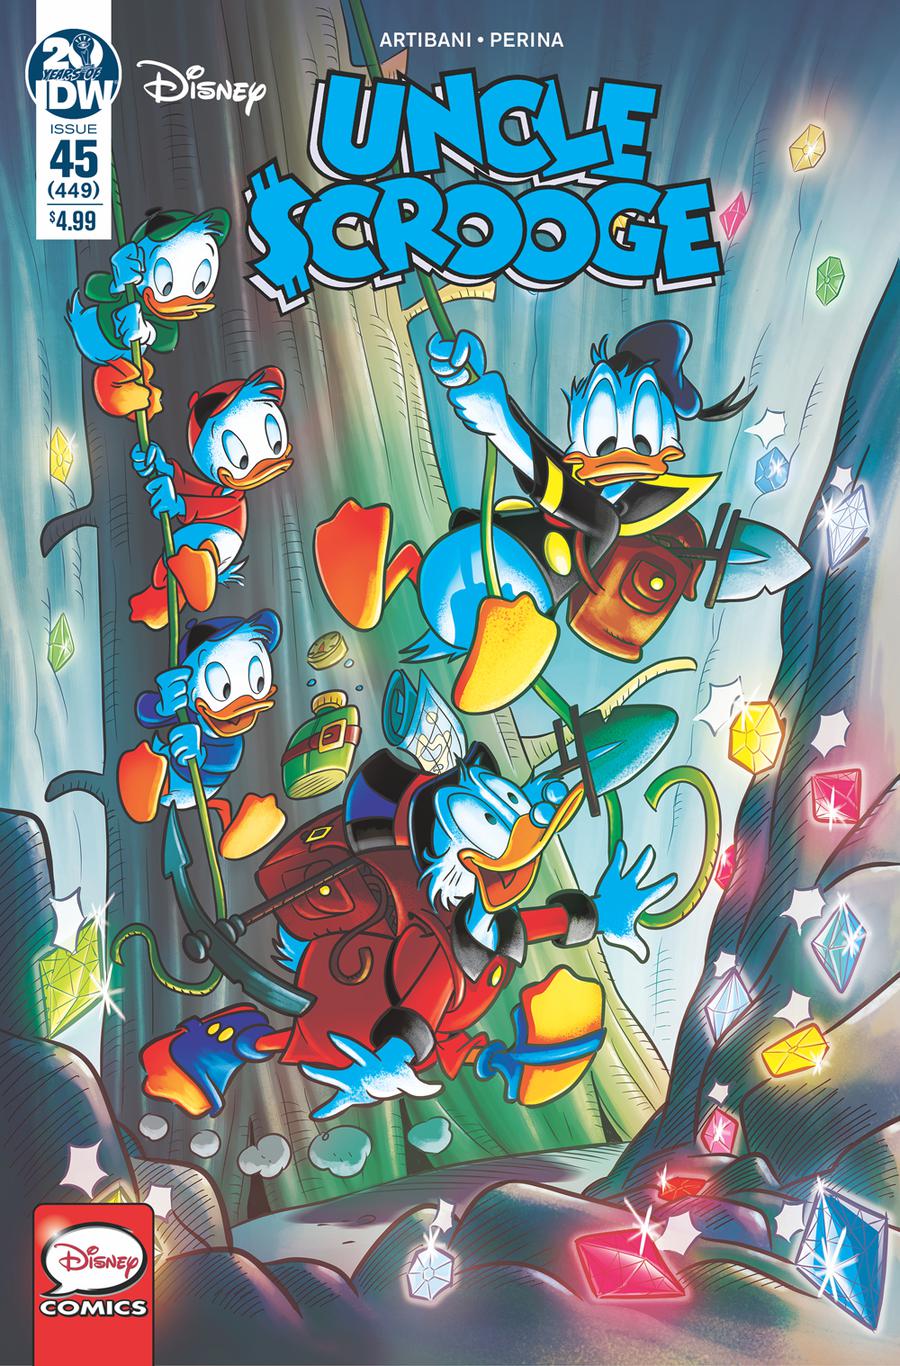 Uncle Scrooge Vol 2 #45 Cover A Regular Marco Gervasio Cover